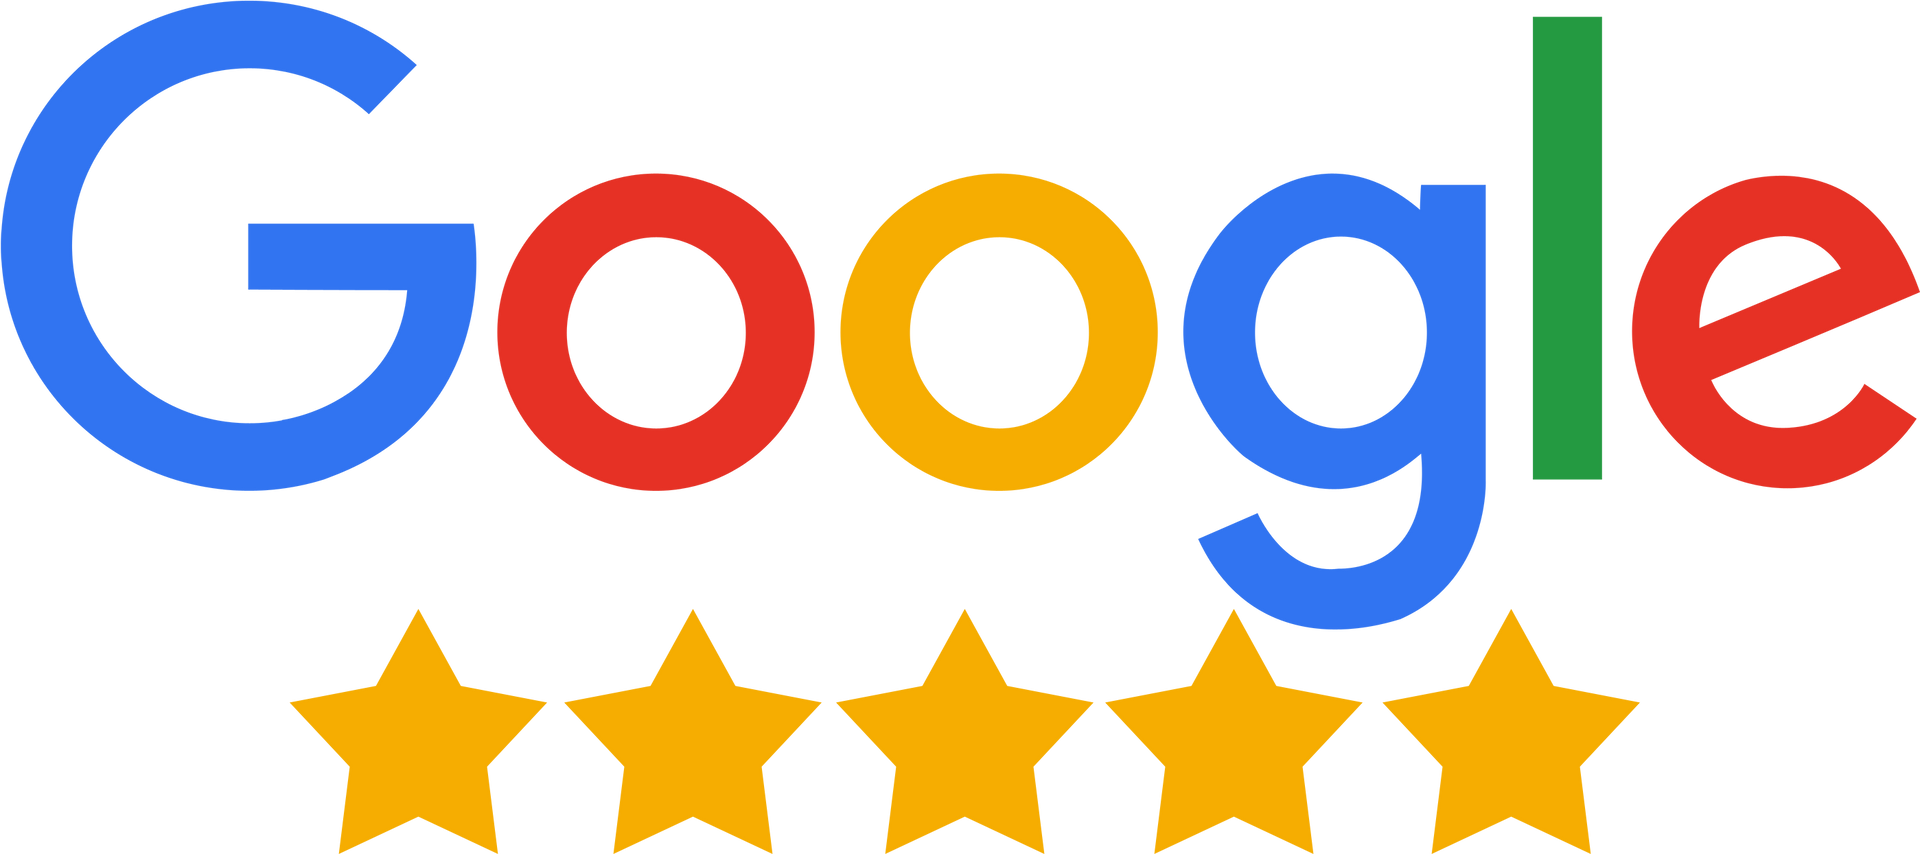 A google logo with five stars on it on a white background.